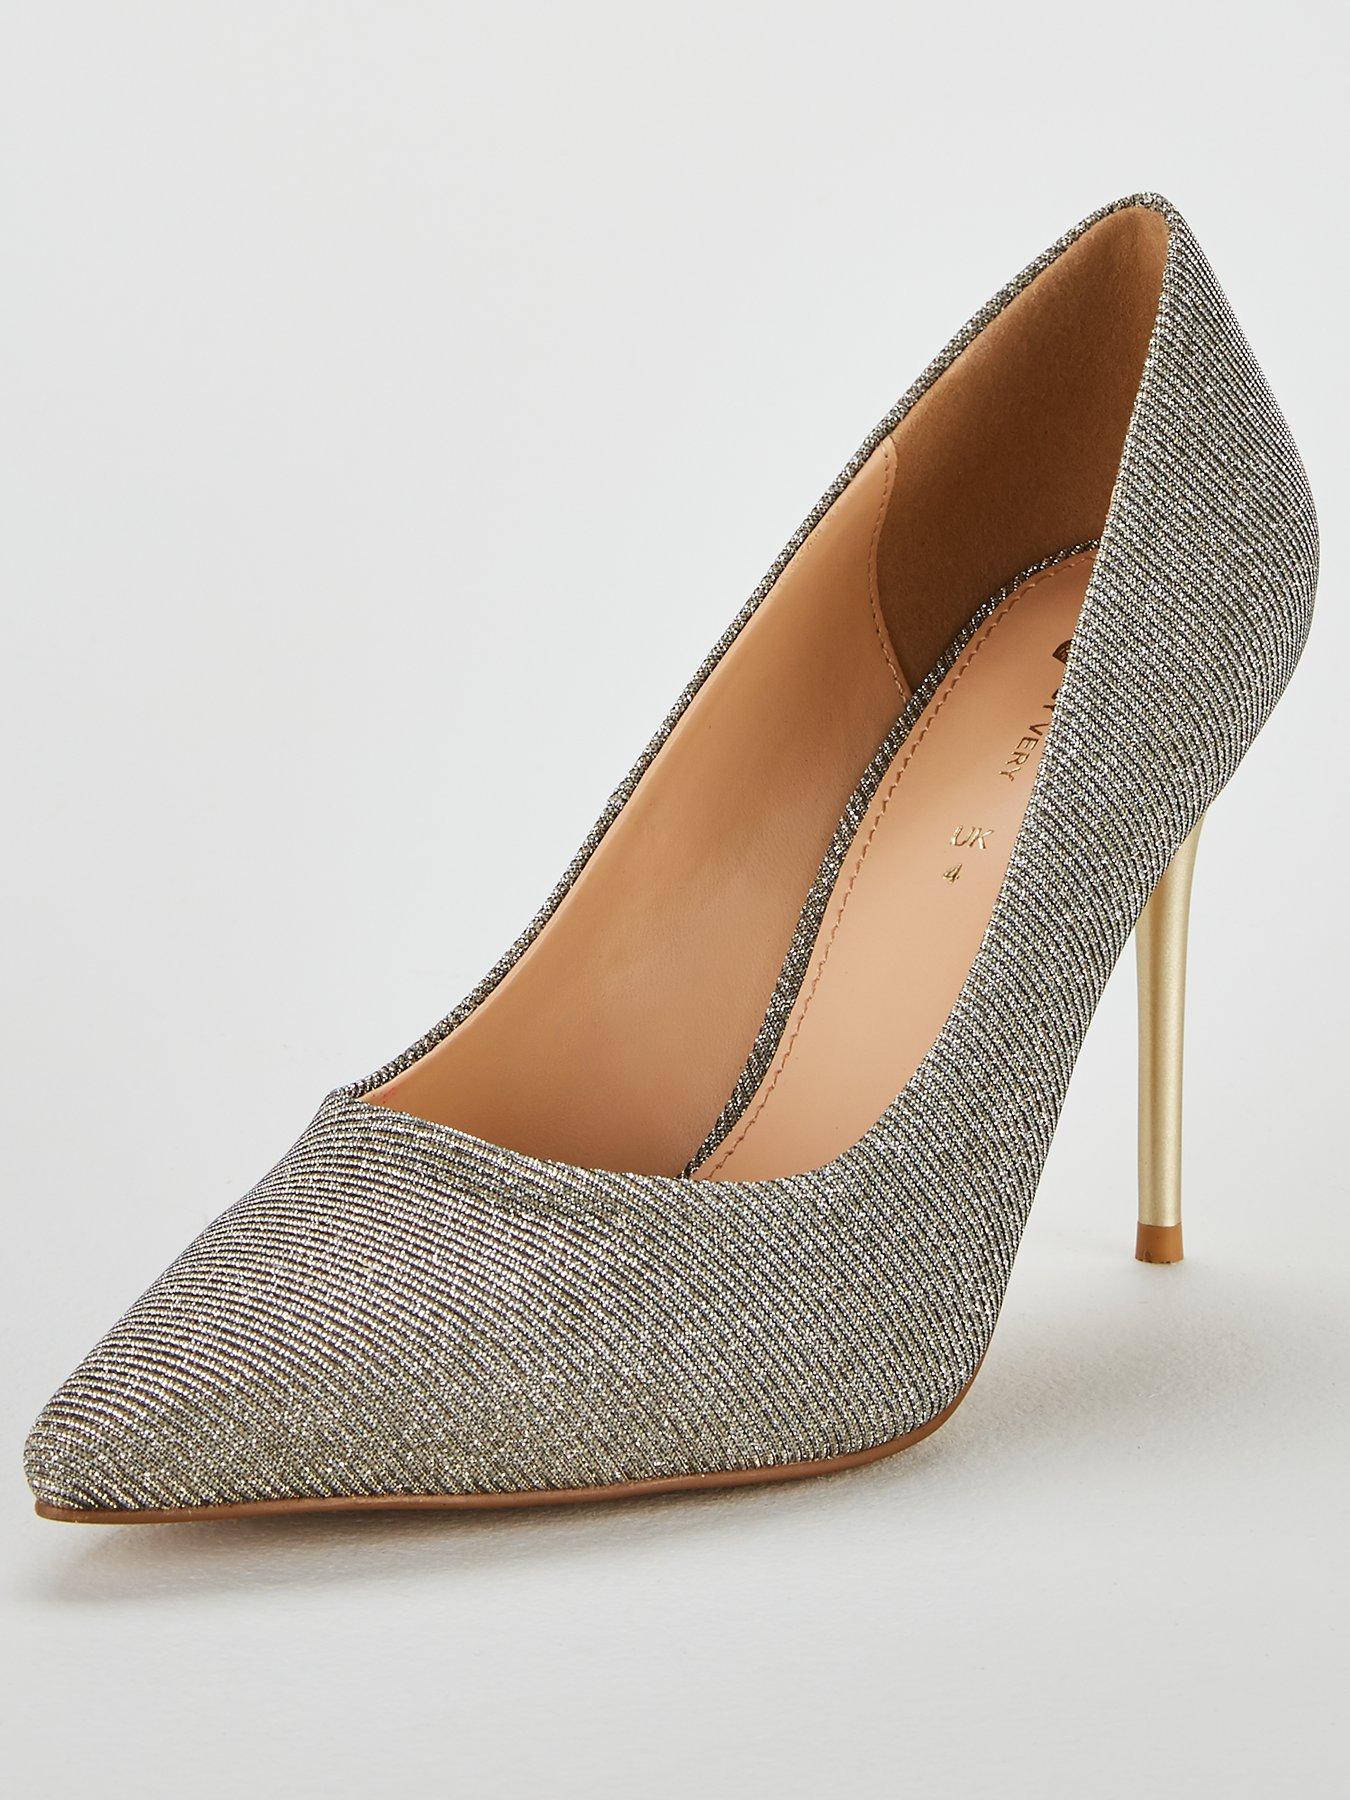 v-by-very-chick-high-heel-point-court-shoe-metallic